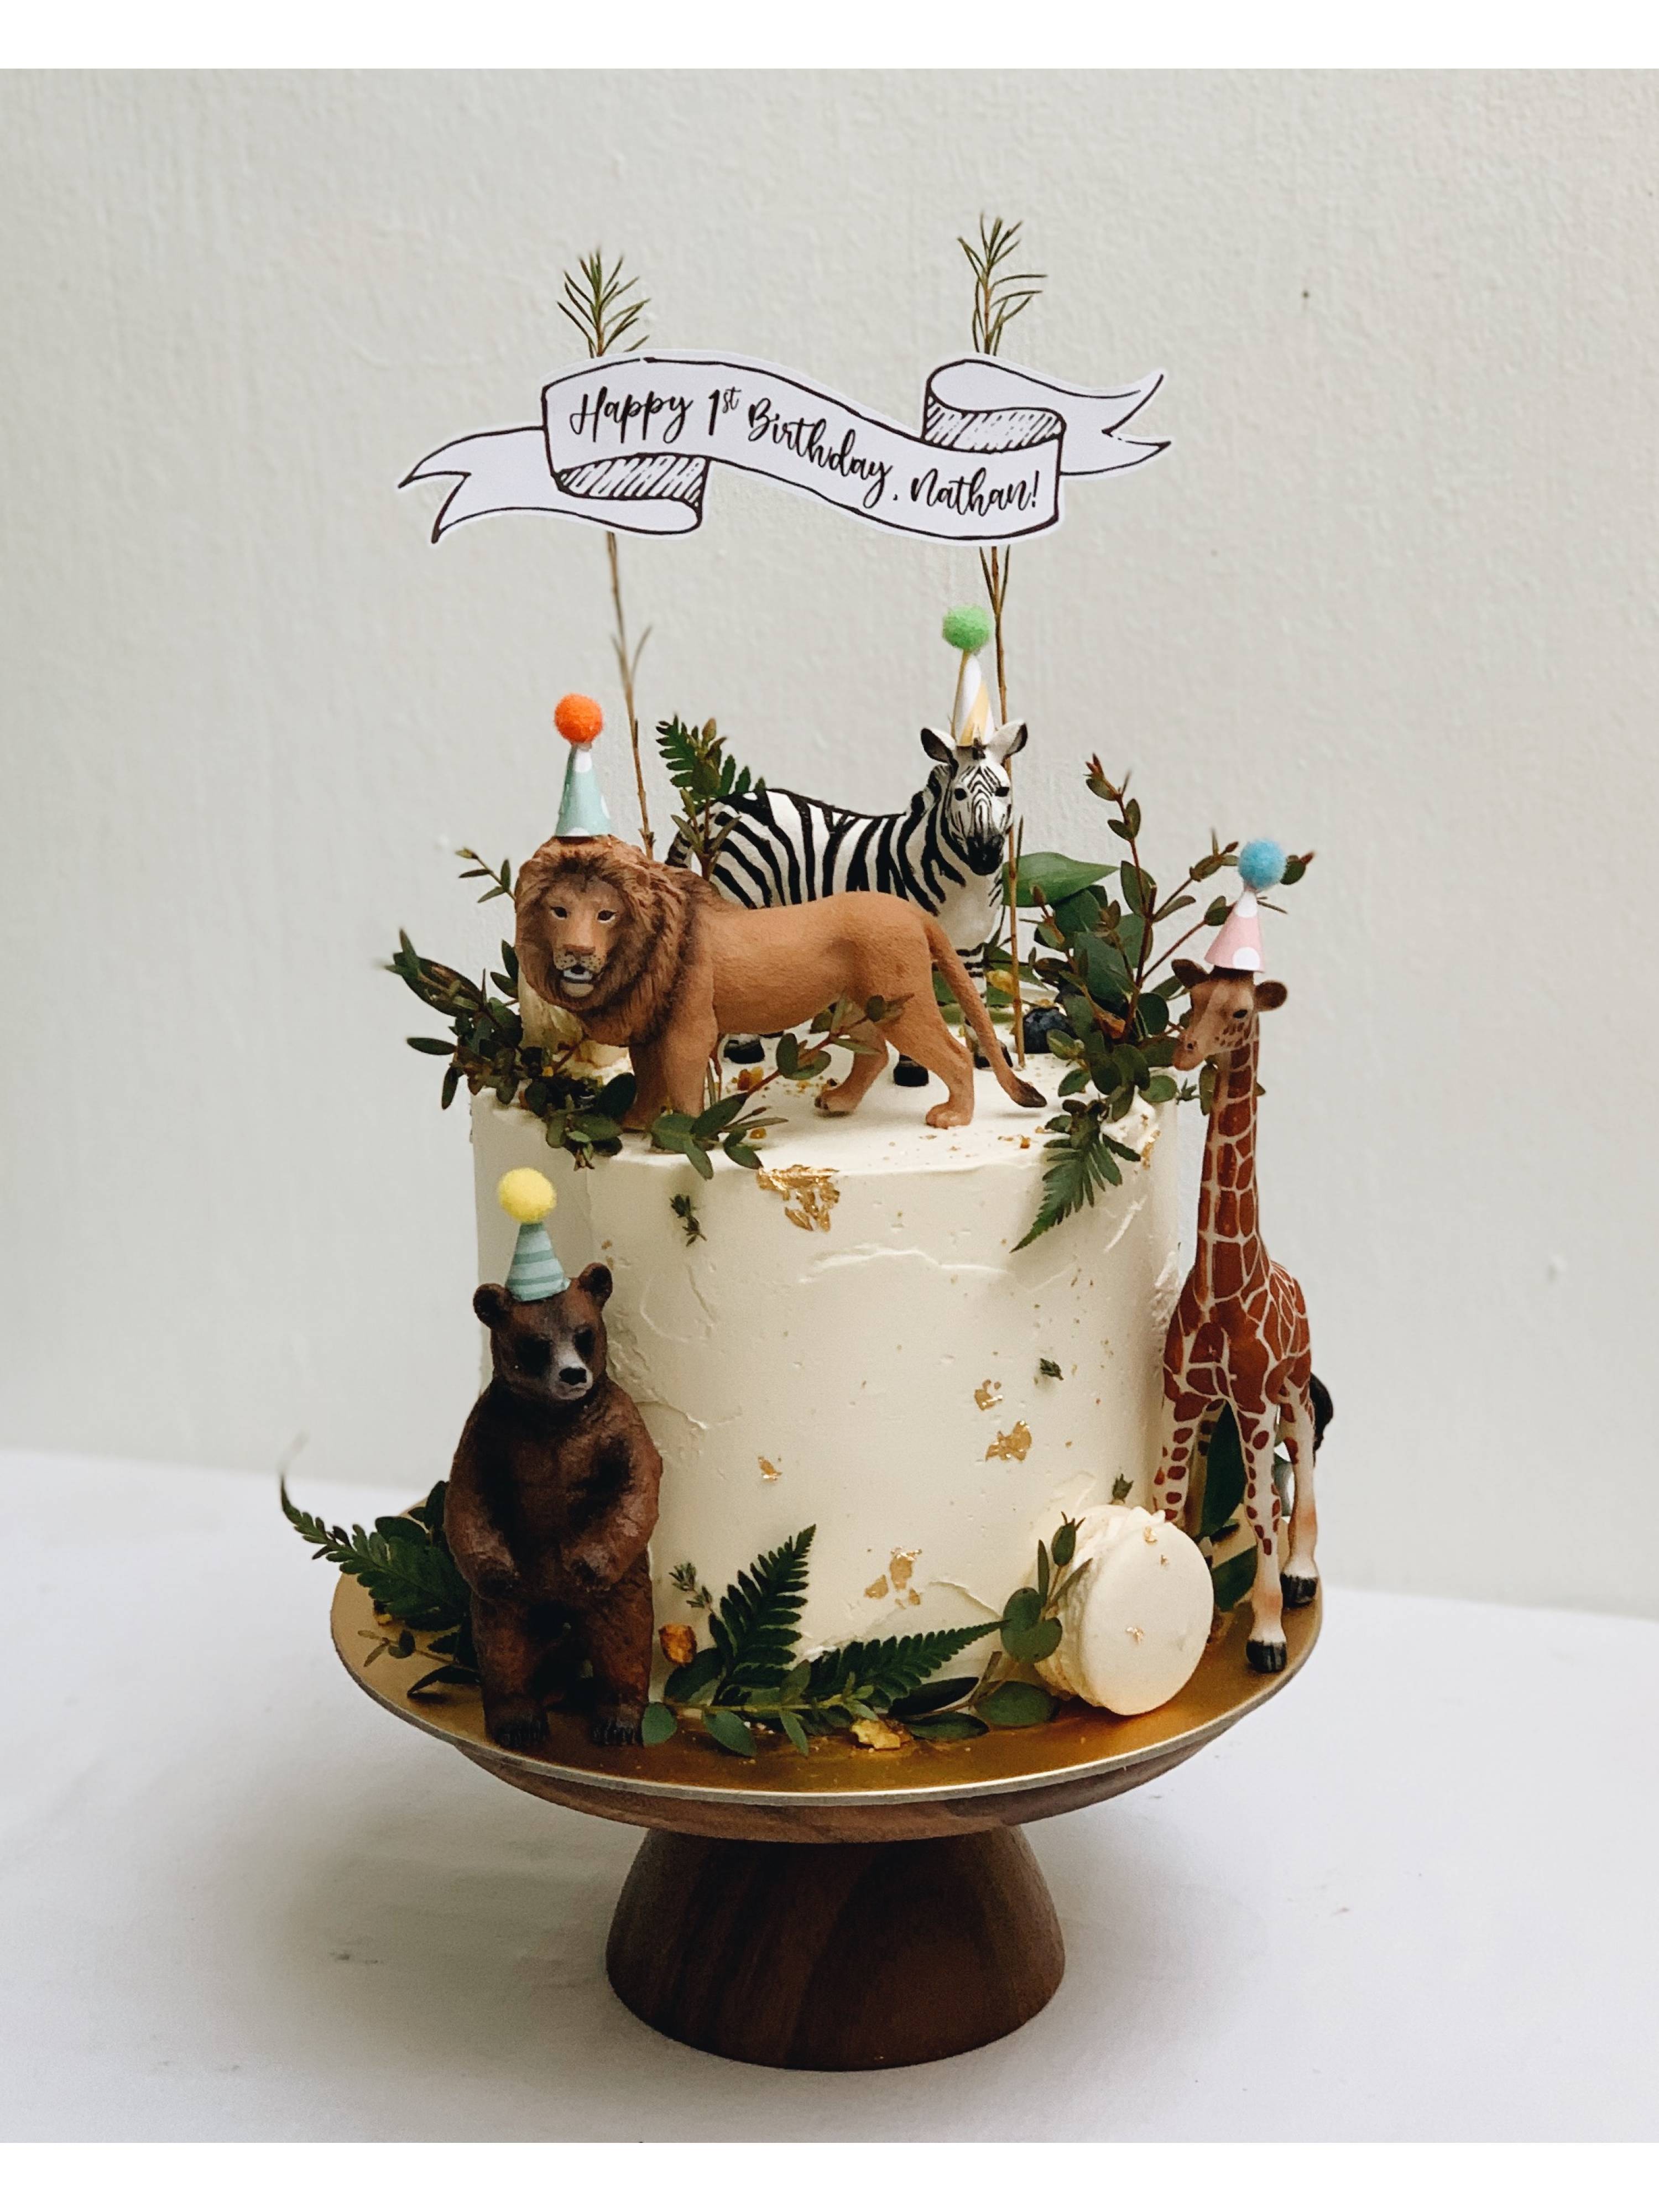 A5. Rustic Party Animal Cake